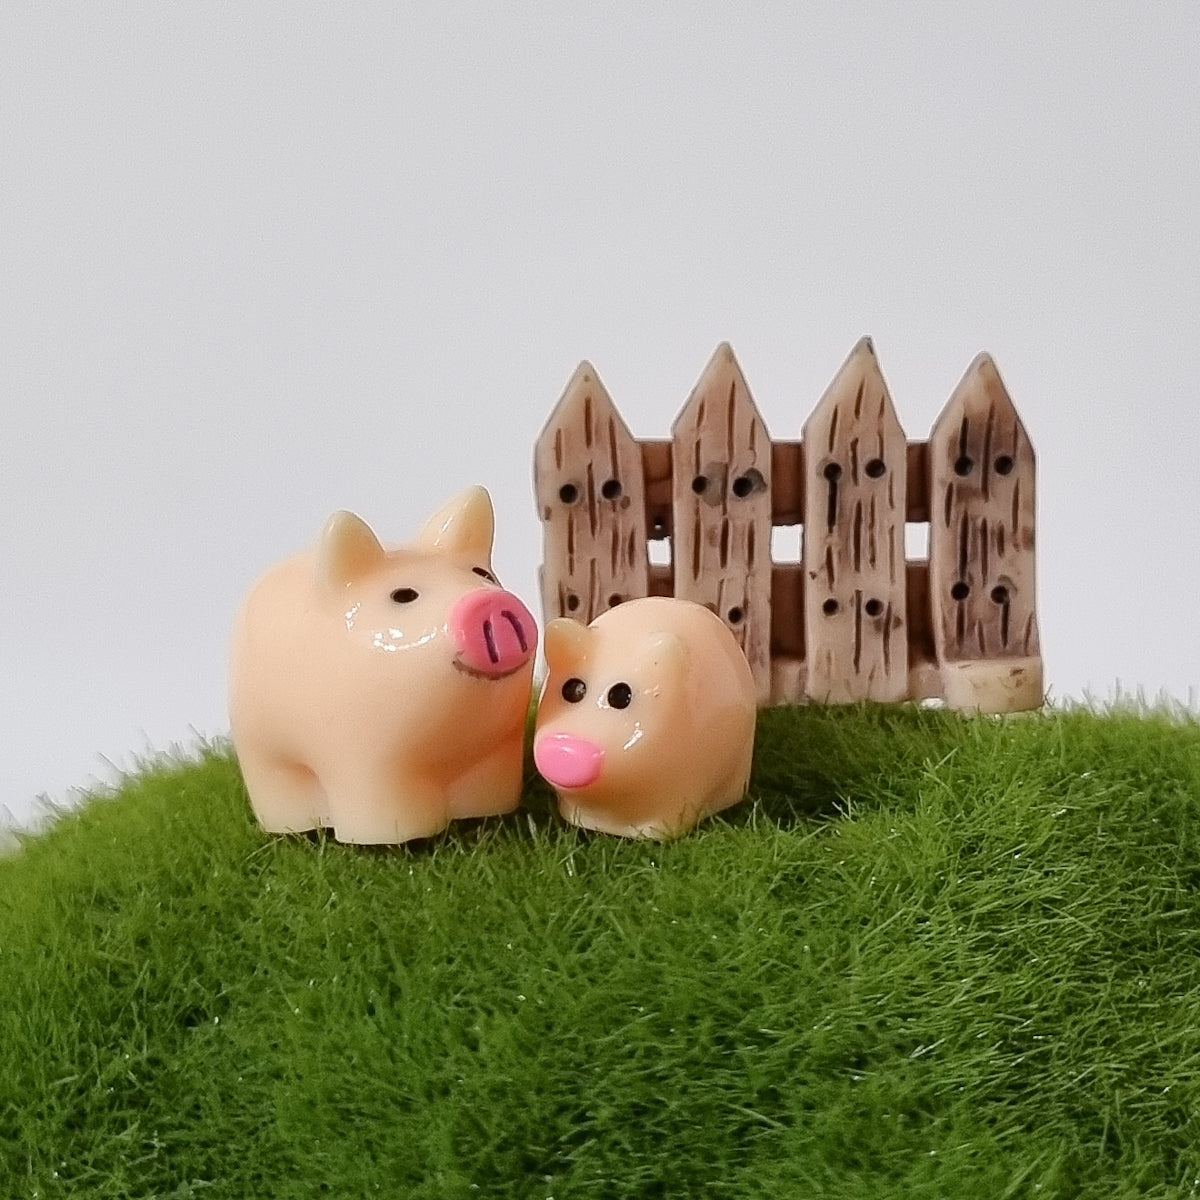 3 in 1 Set A (big pig, small pig, fence)